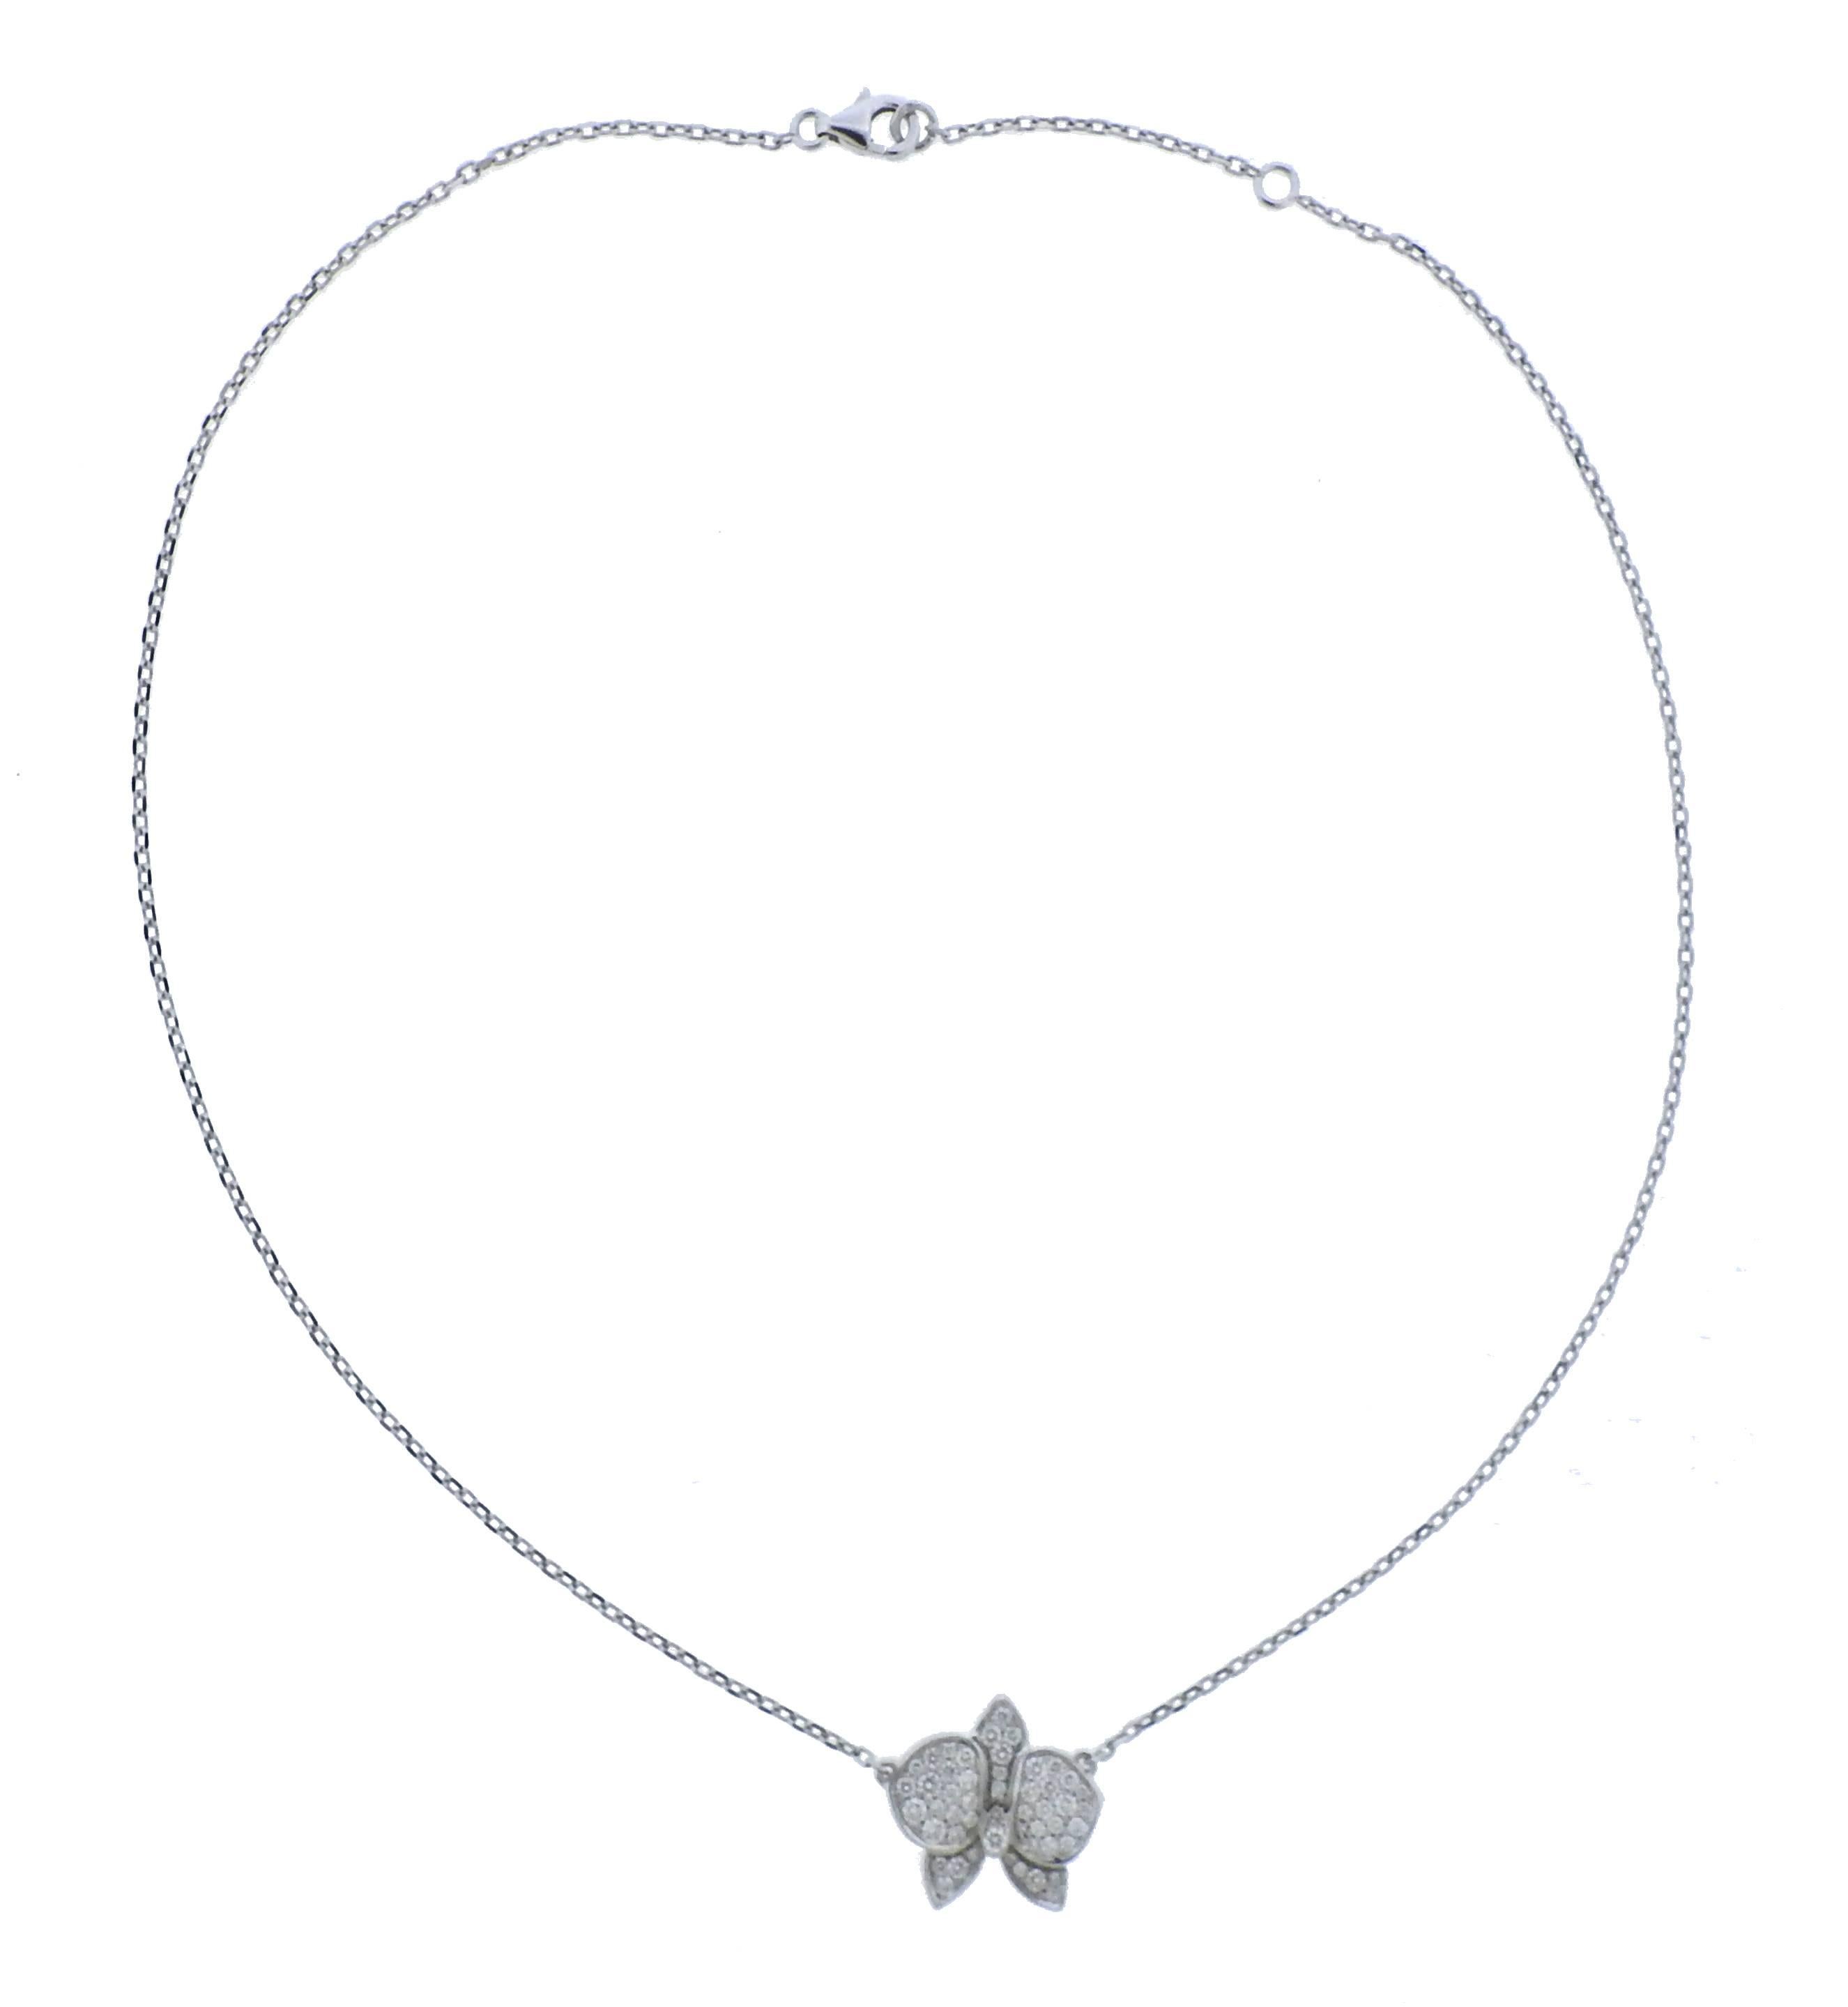 18k white gold and diamond necklace, crafted by Cartier for Caresse d'Orchidees collection. Retail $9550. Necklace comes with box and COA. Necklace is 16.75